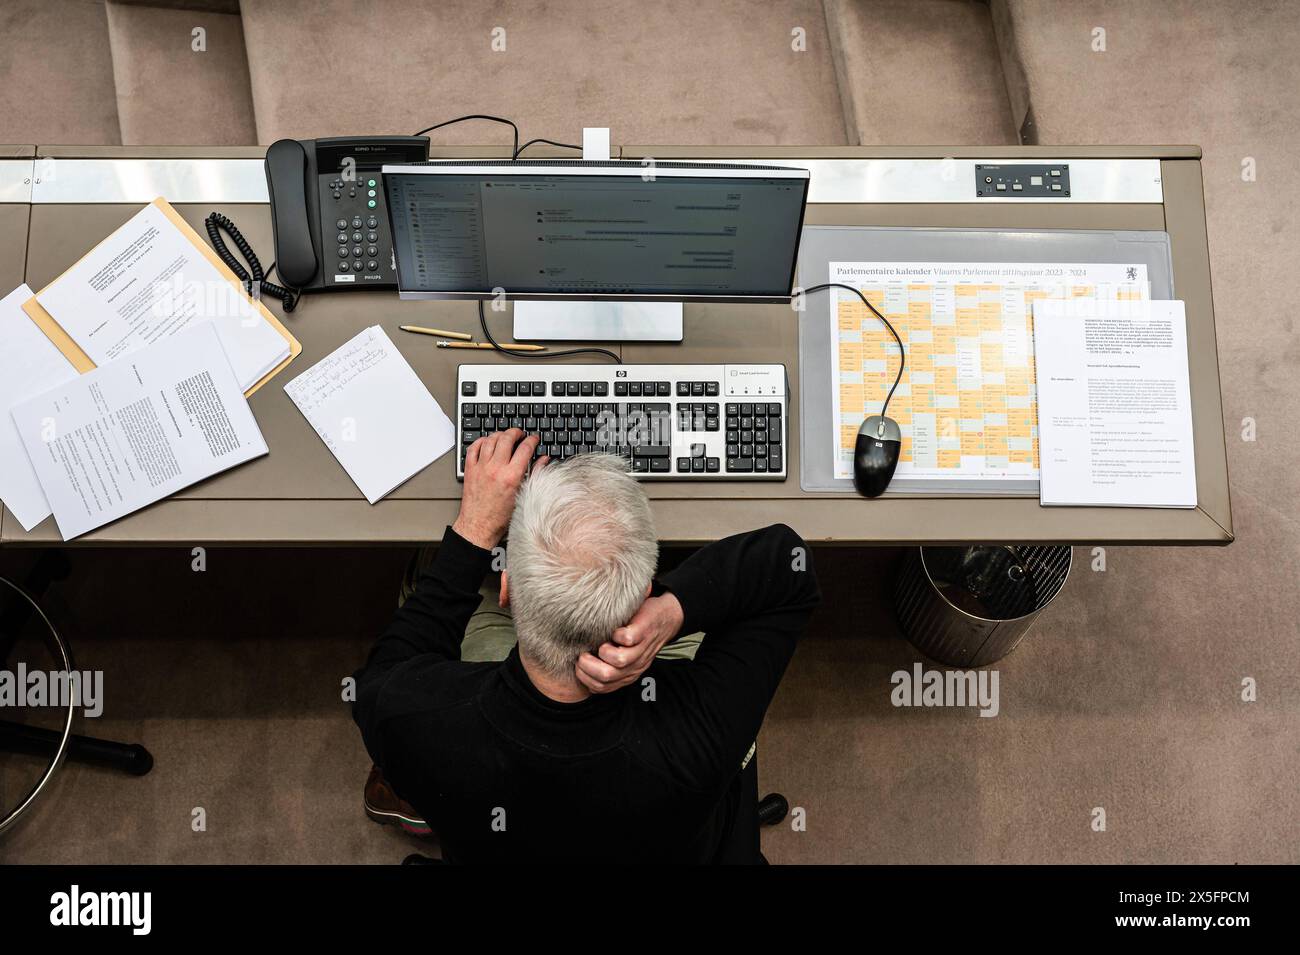 Brussels, Flemish Parliament, May 8, 2024 - Official at work, organising the debate using a PC, paper notes and the parlementary calendar as a guide Stock Photo